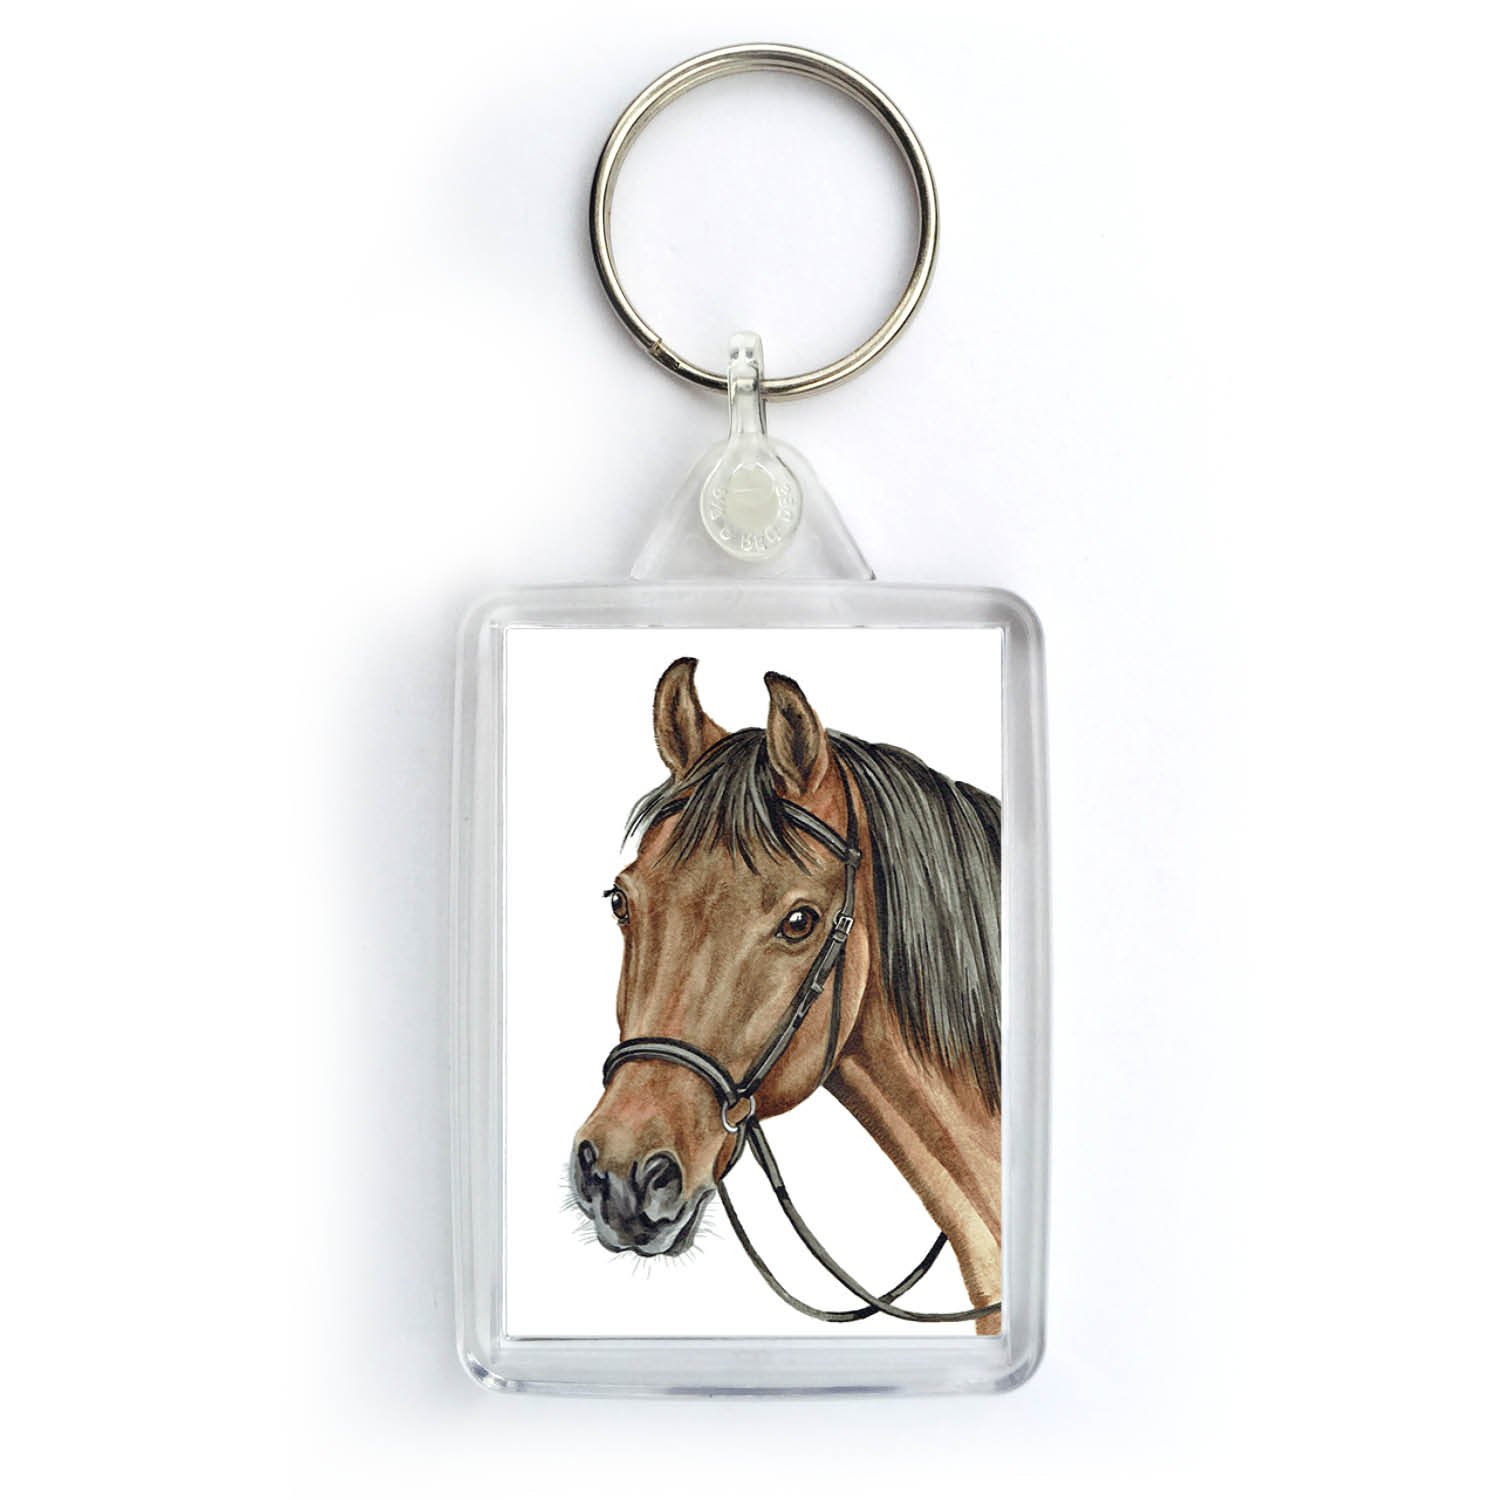 Grey Warmblood Horse Print Acrylic Key Chain Details about  / Equine Key Ring